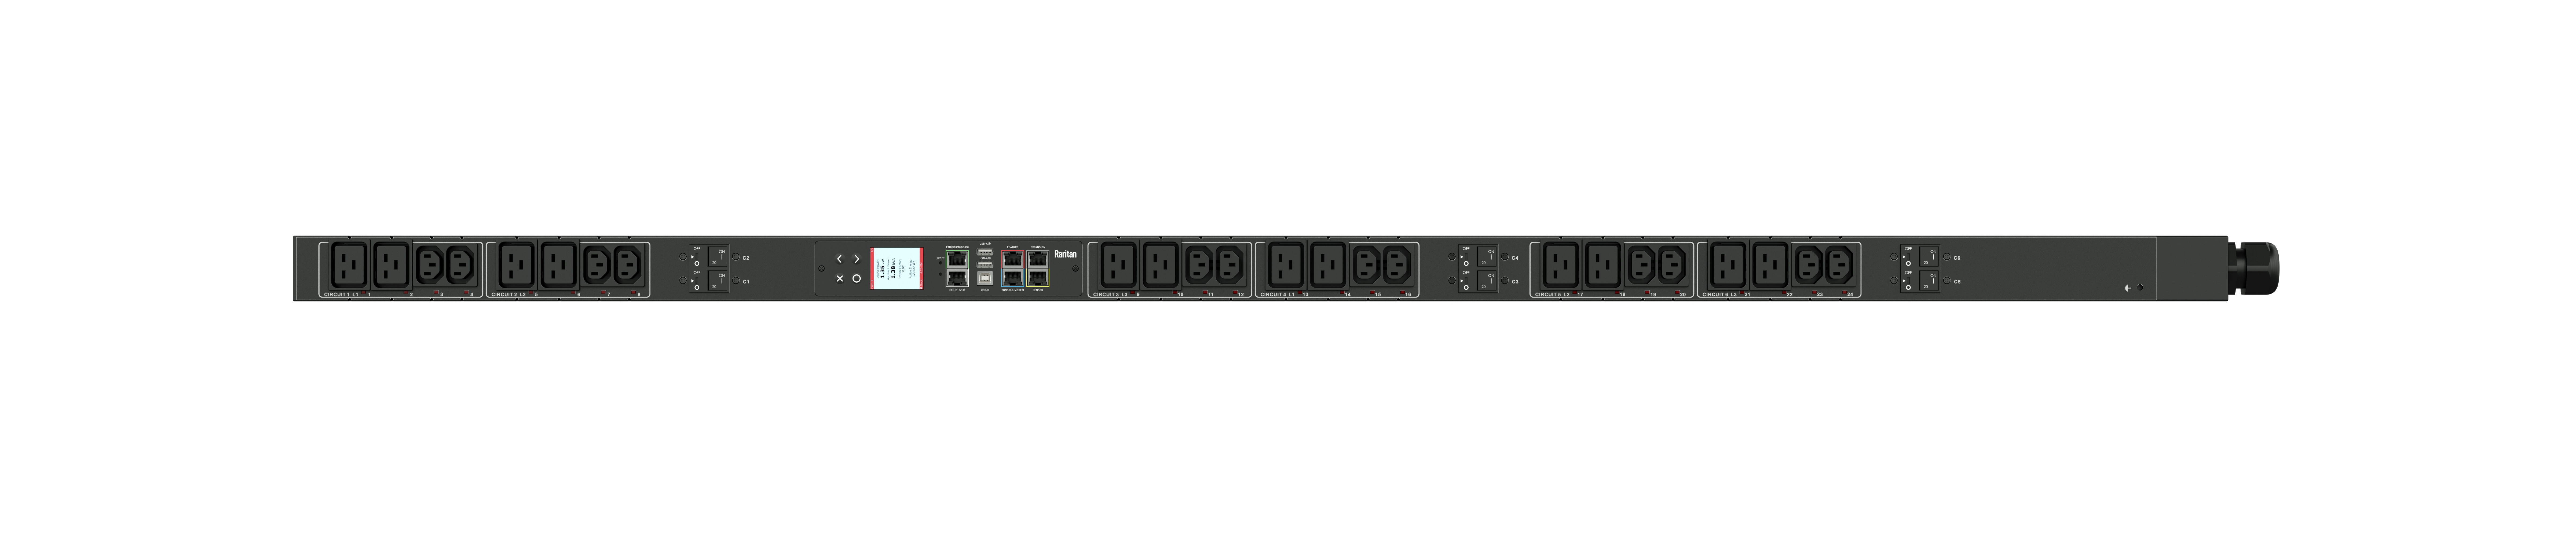 Raritan Monitored rack power distribution unit, 400V 32A,3-phase WYE, 22.2kVA, IEC 60309 Plug with 12@C13 & 12@C19 ZeroU [vertical] Outlets